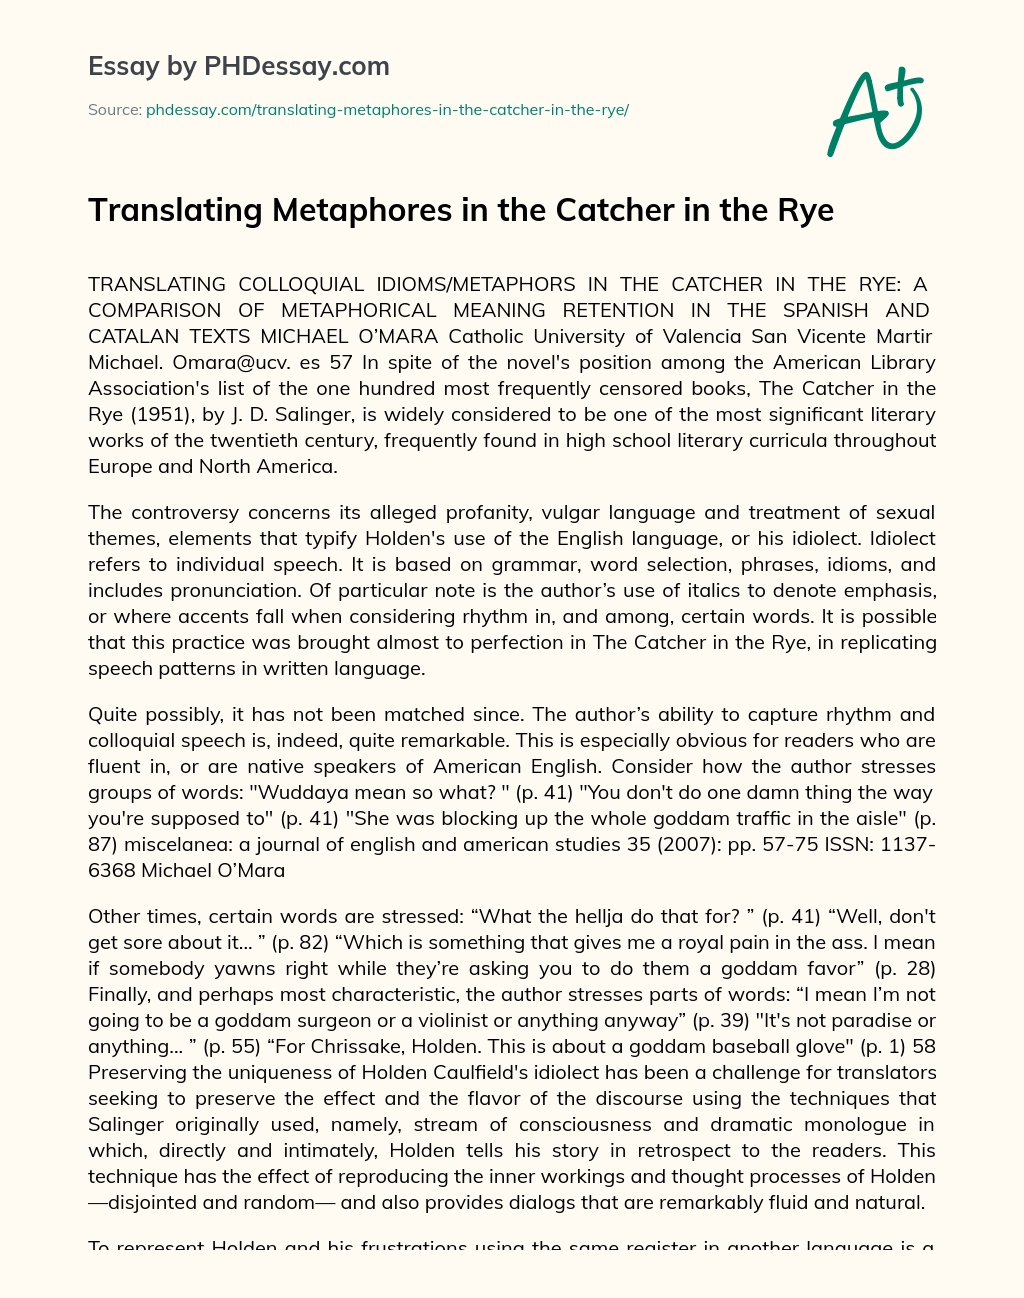 Translating Metaphores in the Catcher in the Rye essay